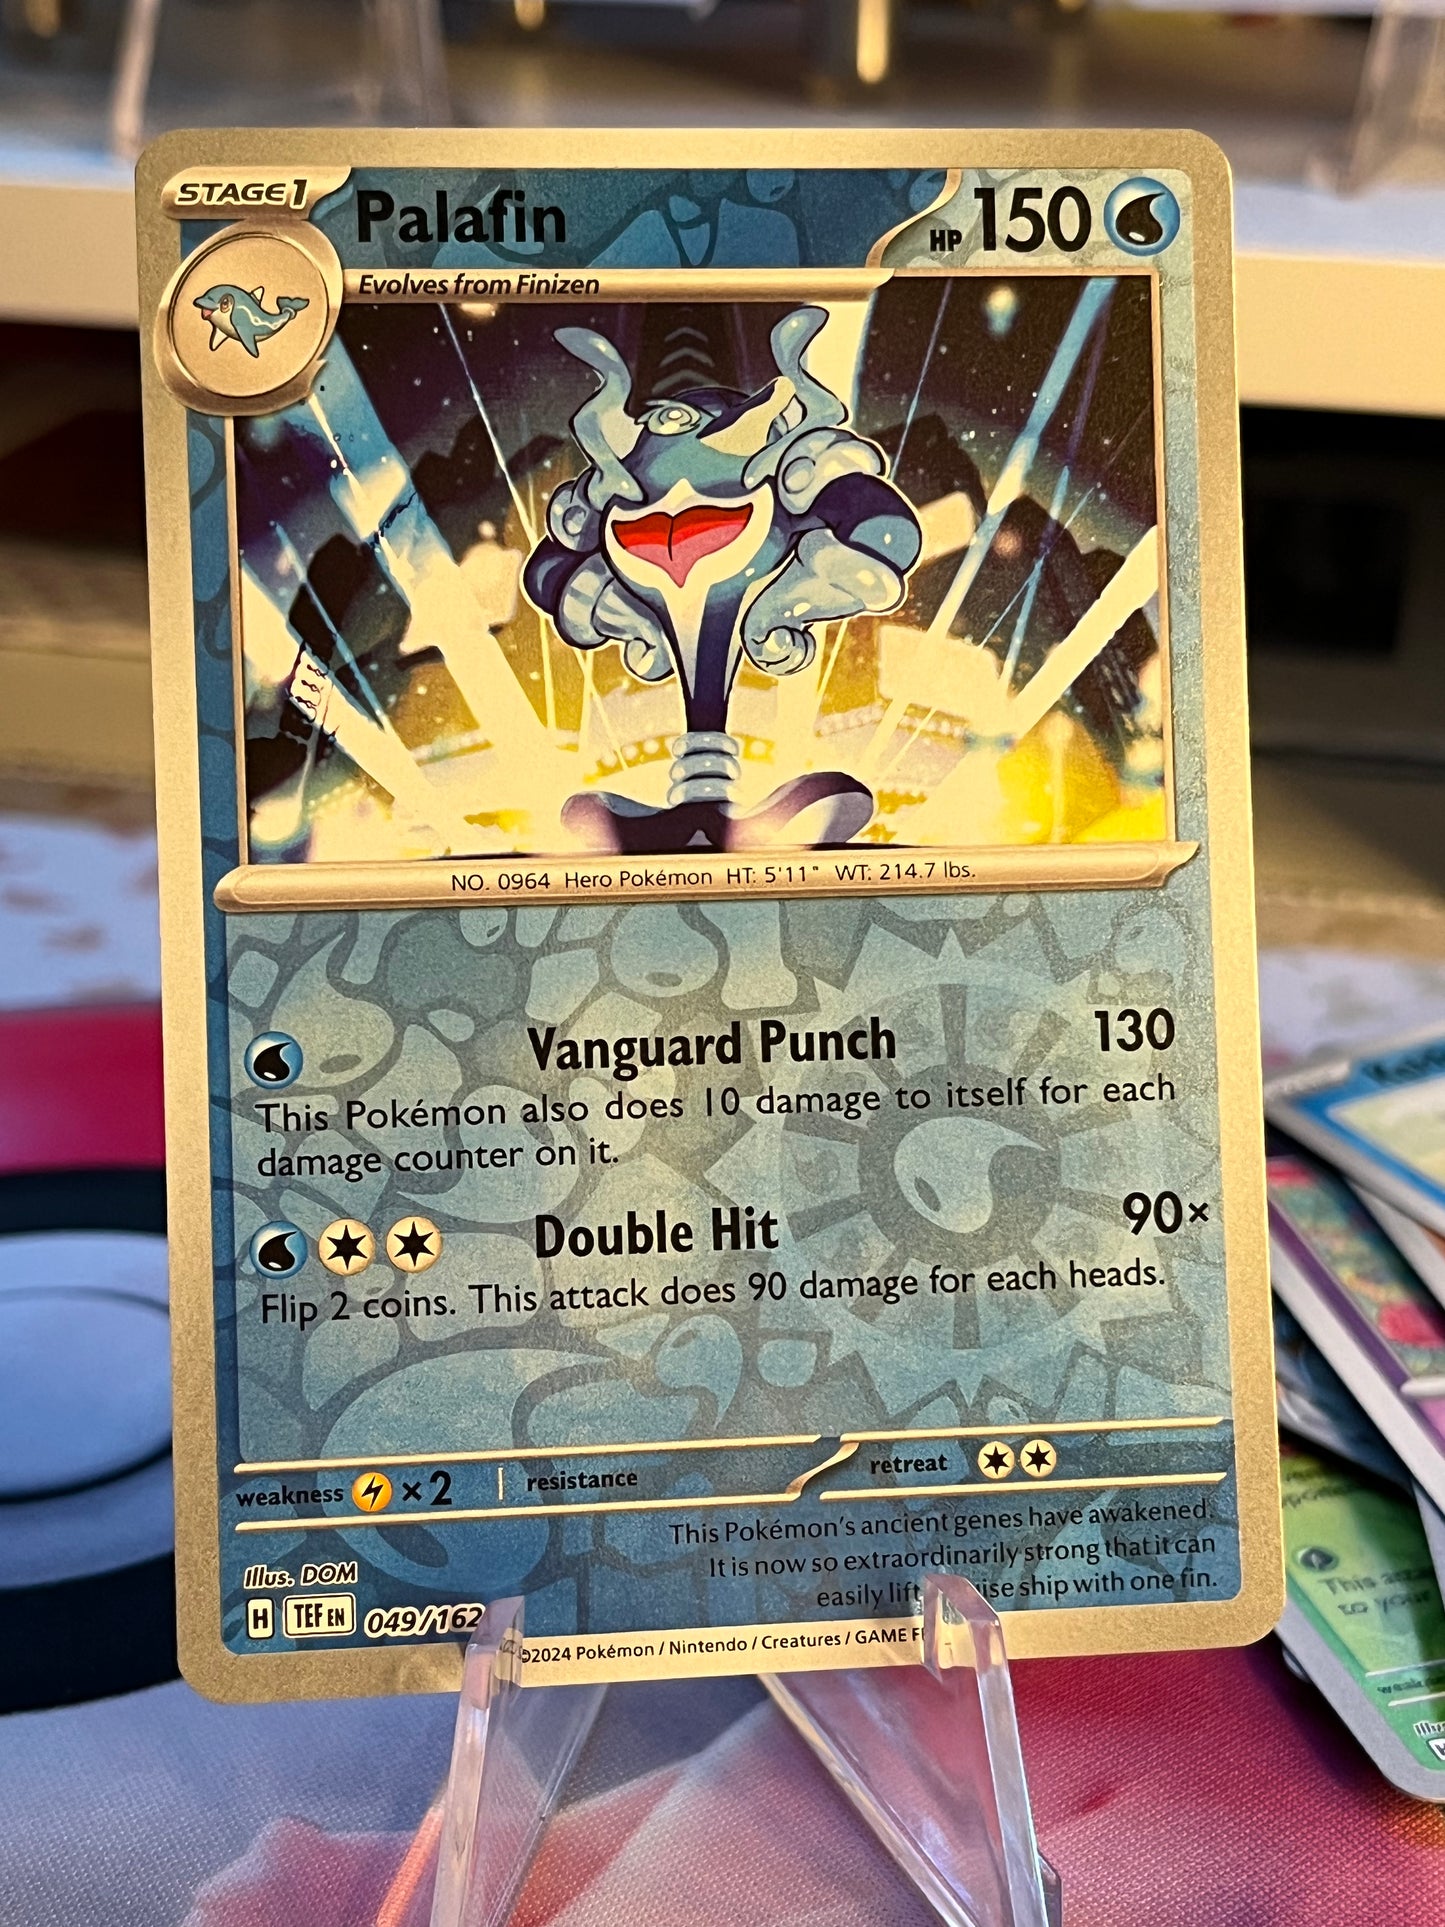 Palafin (Reverse Holo) - SV05: Temporal Forces